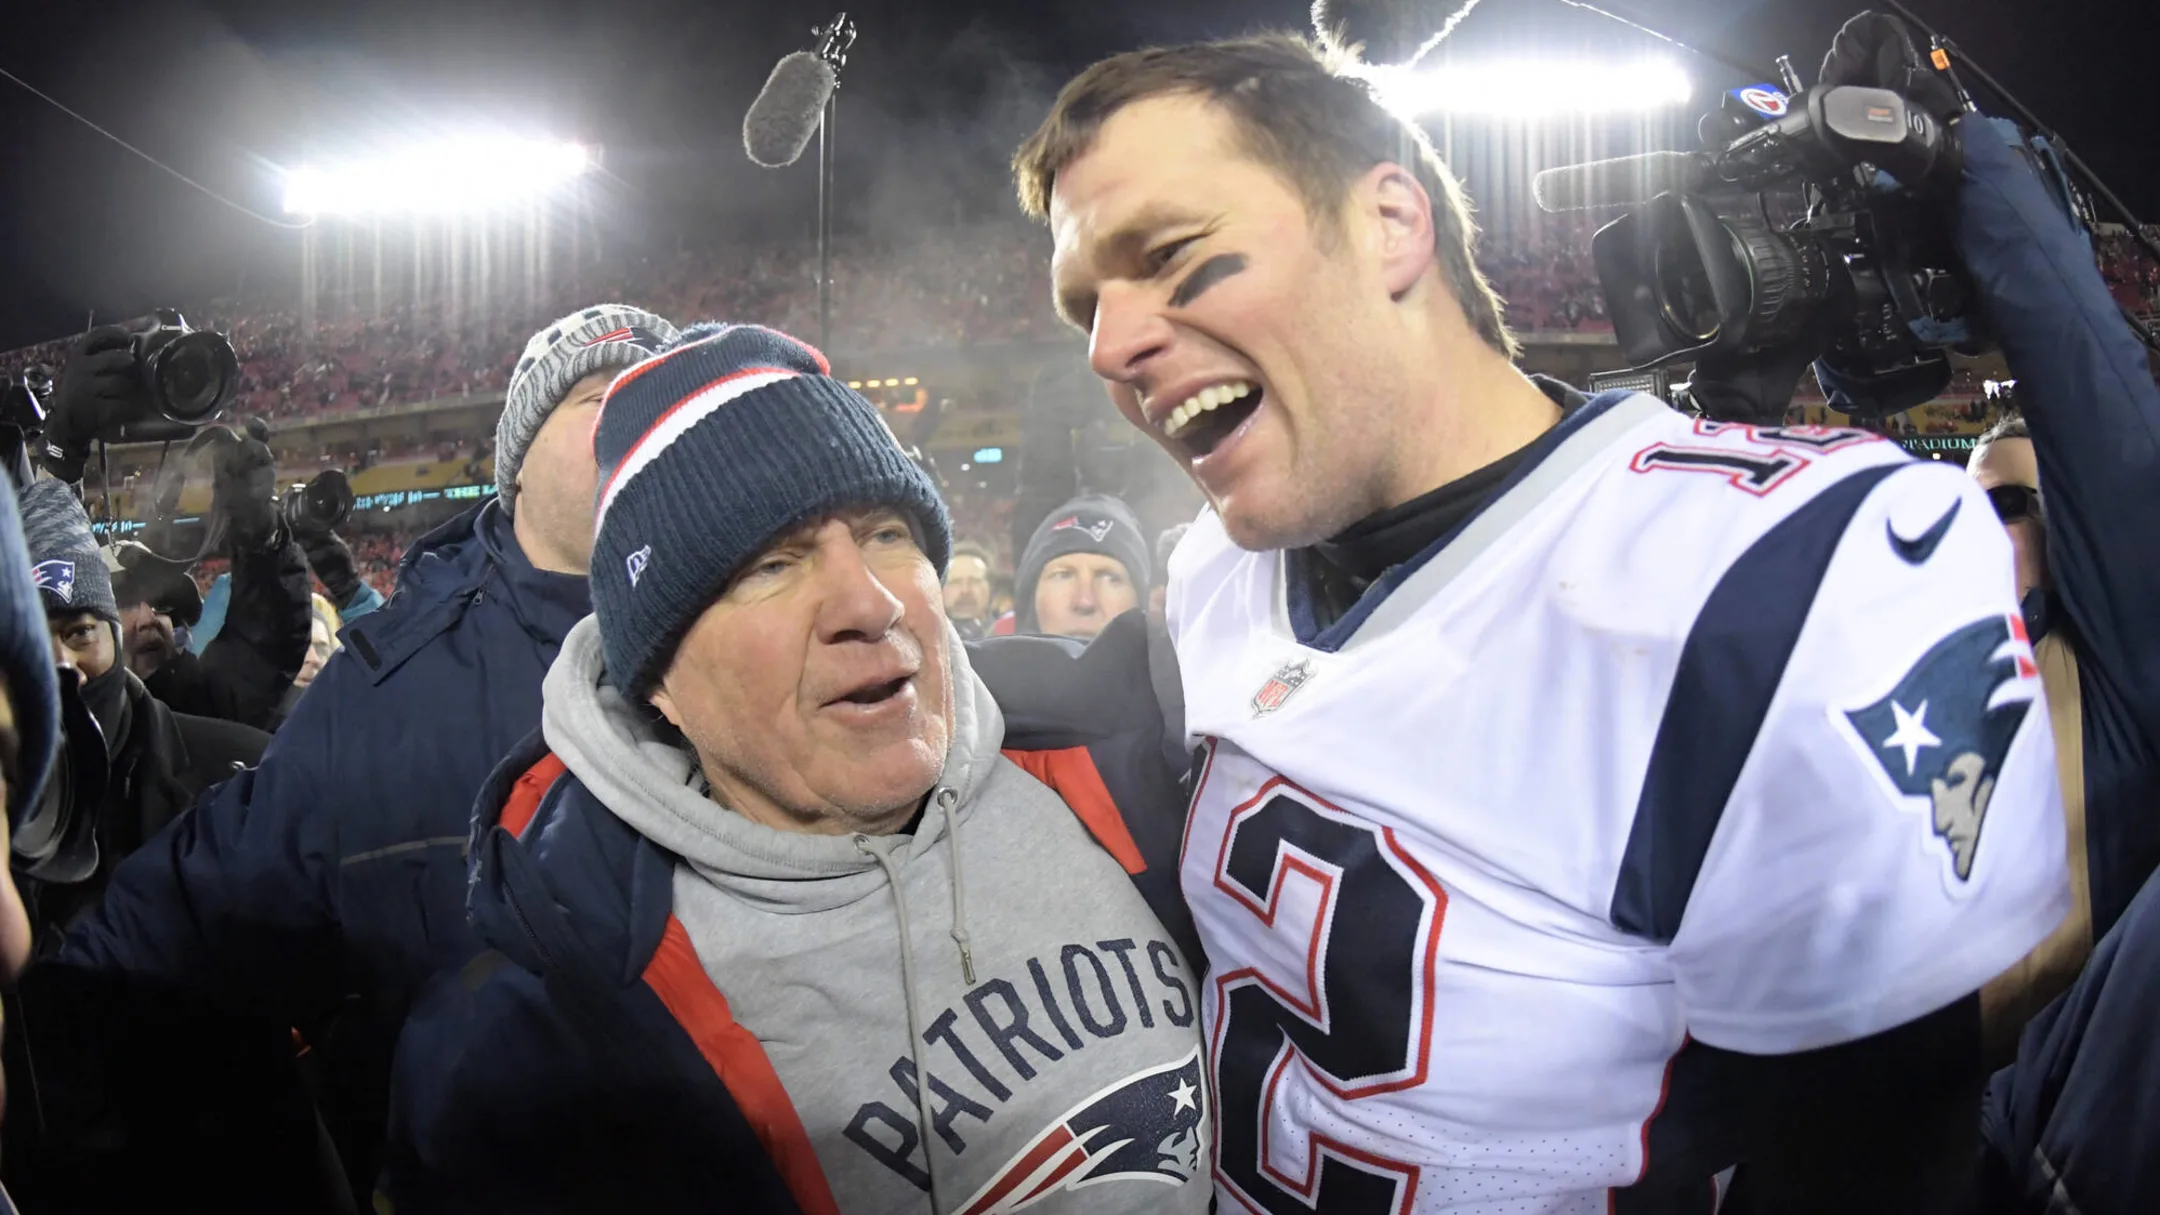 Could Tom Brady Switch Gears to Coaching? Exciting Talks with Patriots Hint at Possible New Role